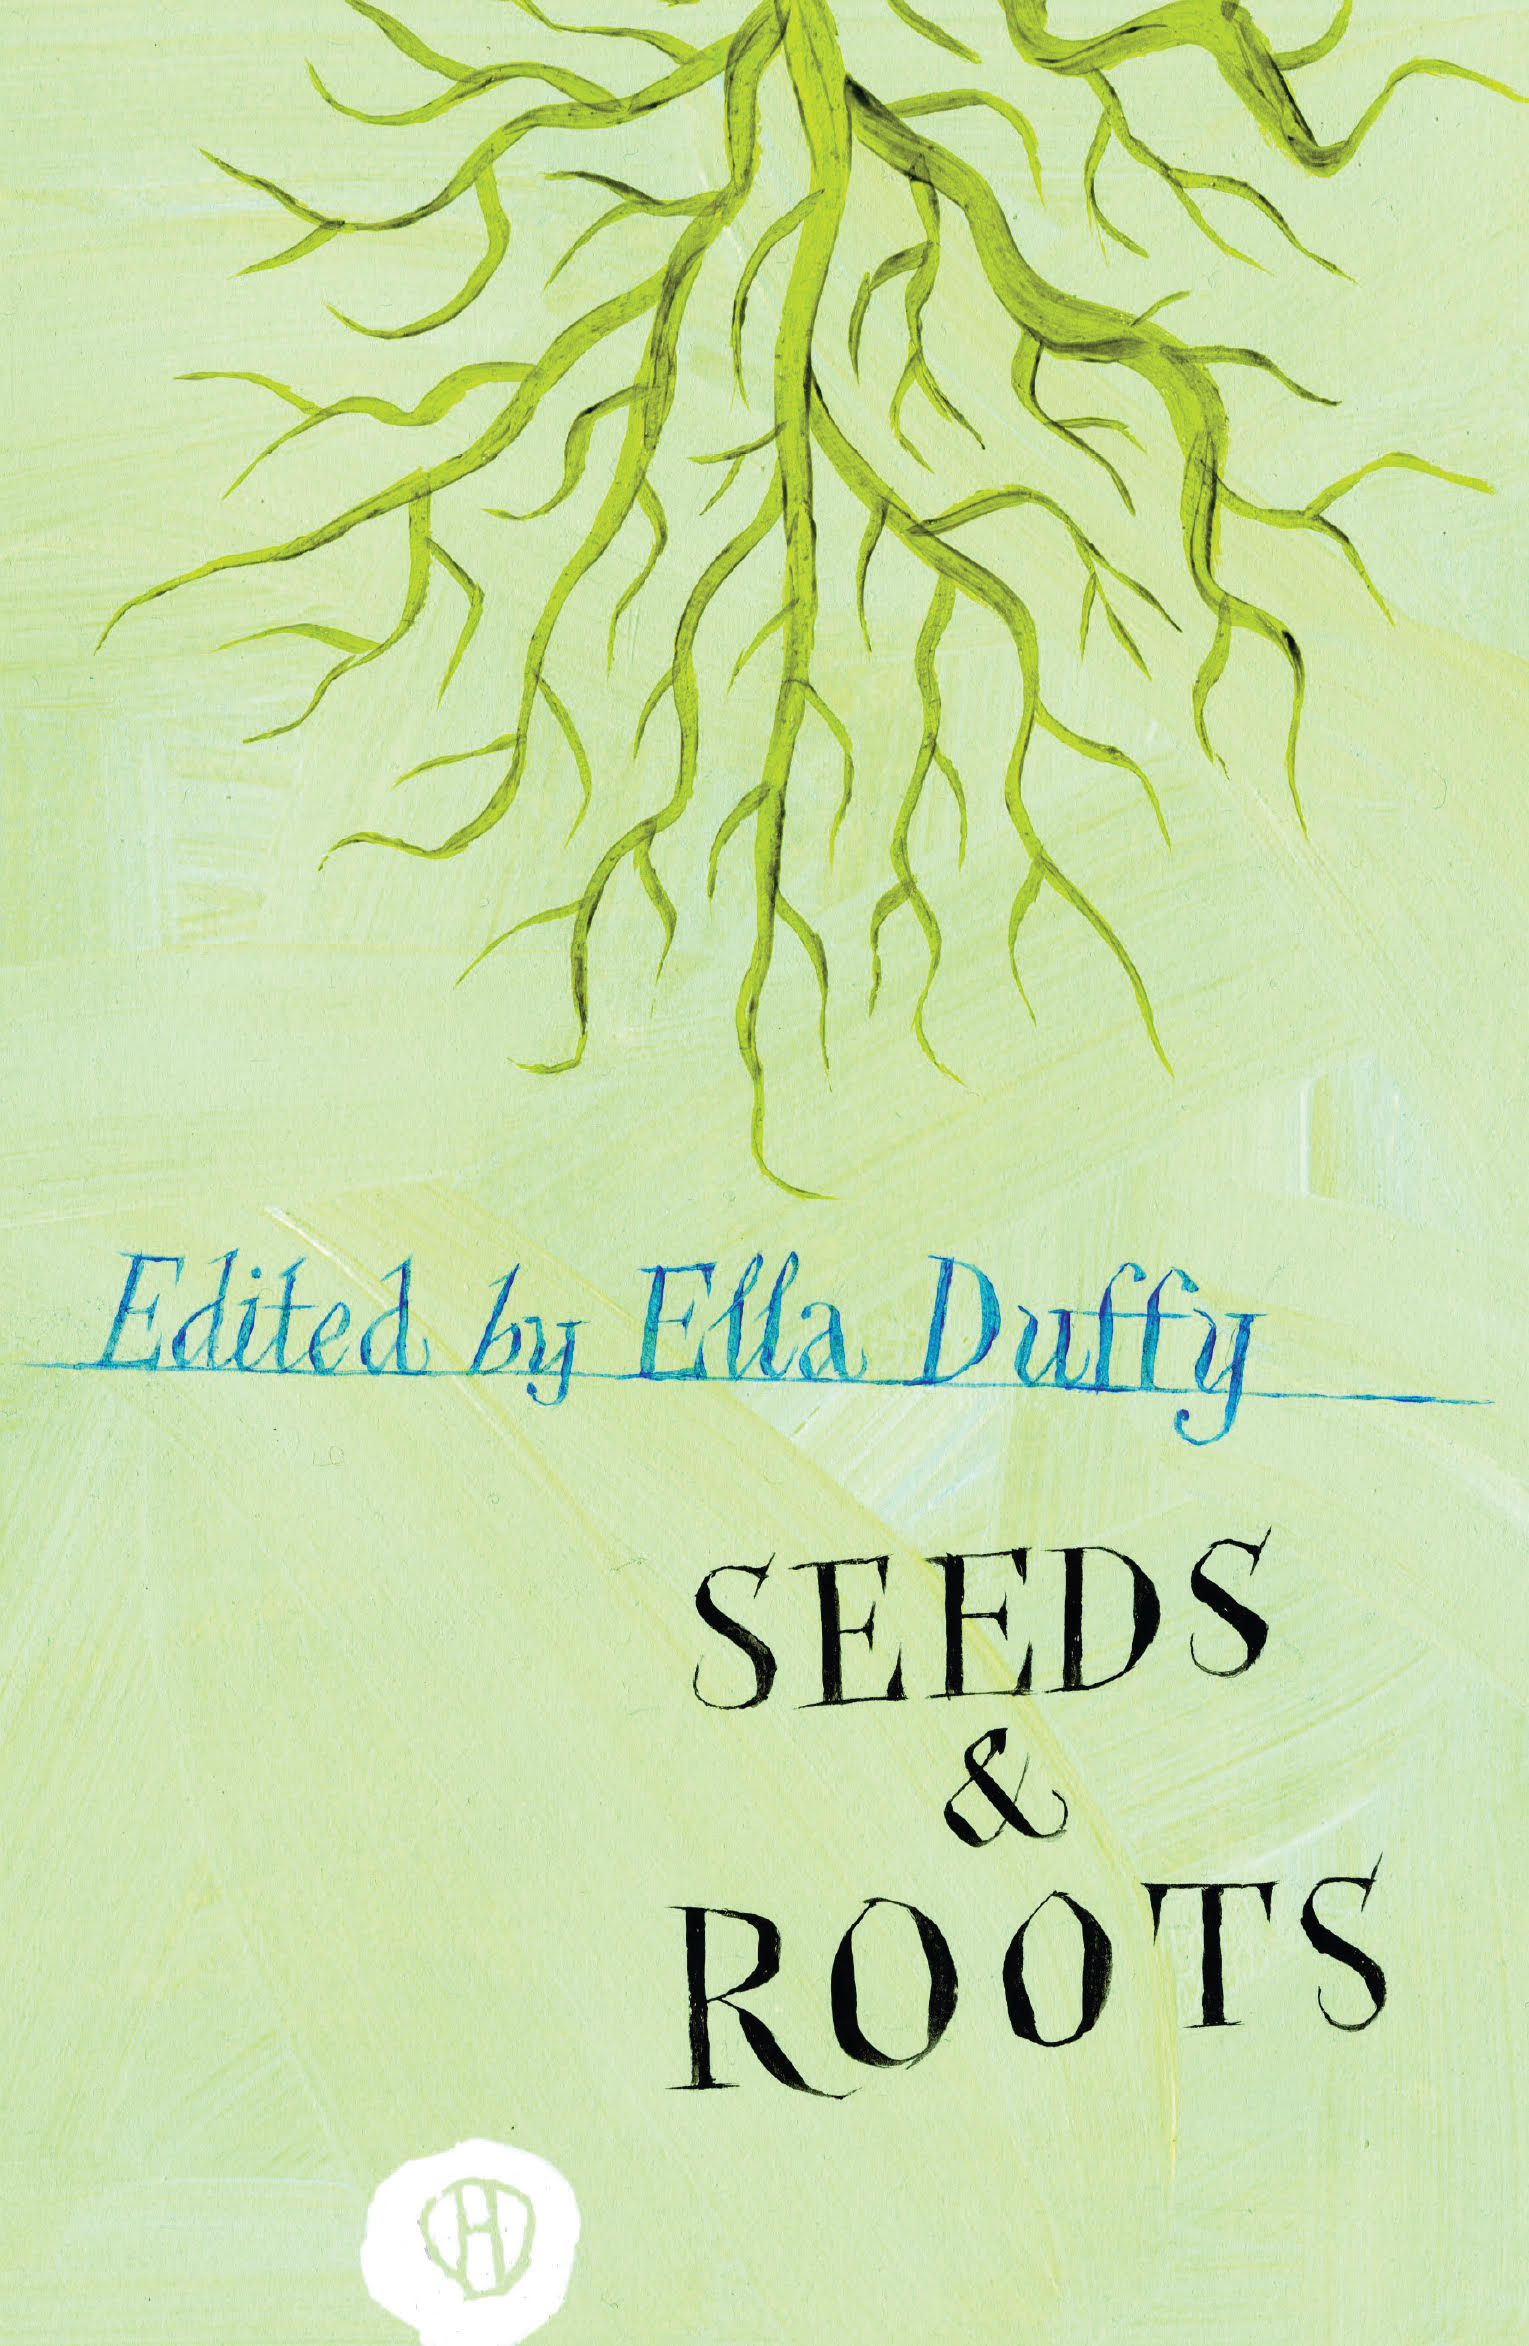 Seeds & Roots, Edited by Ella Duffy